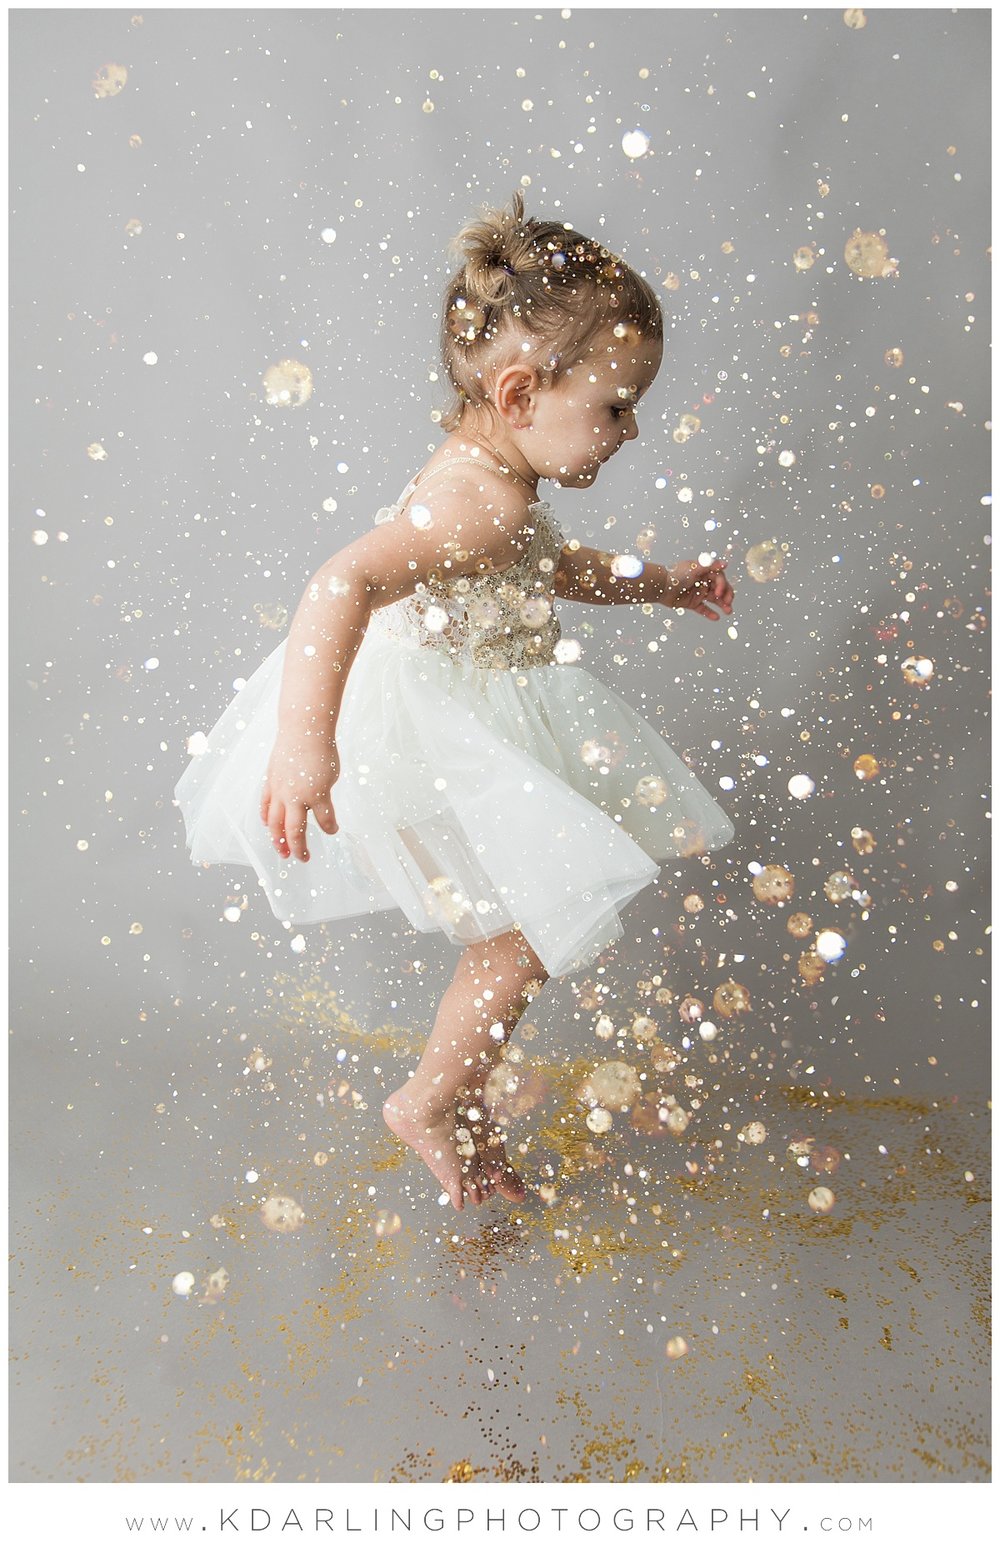 Two year old jumping in glitter